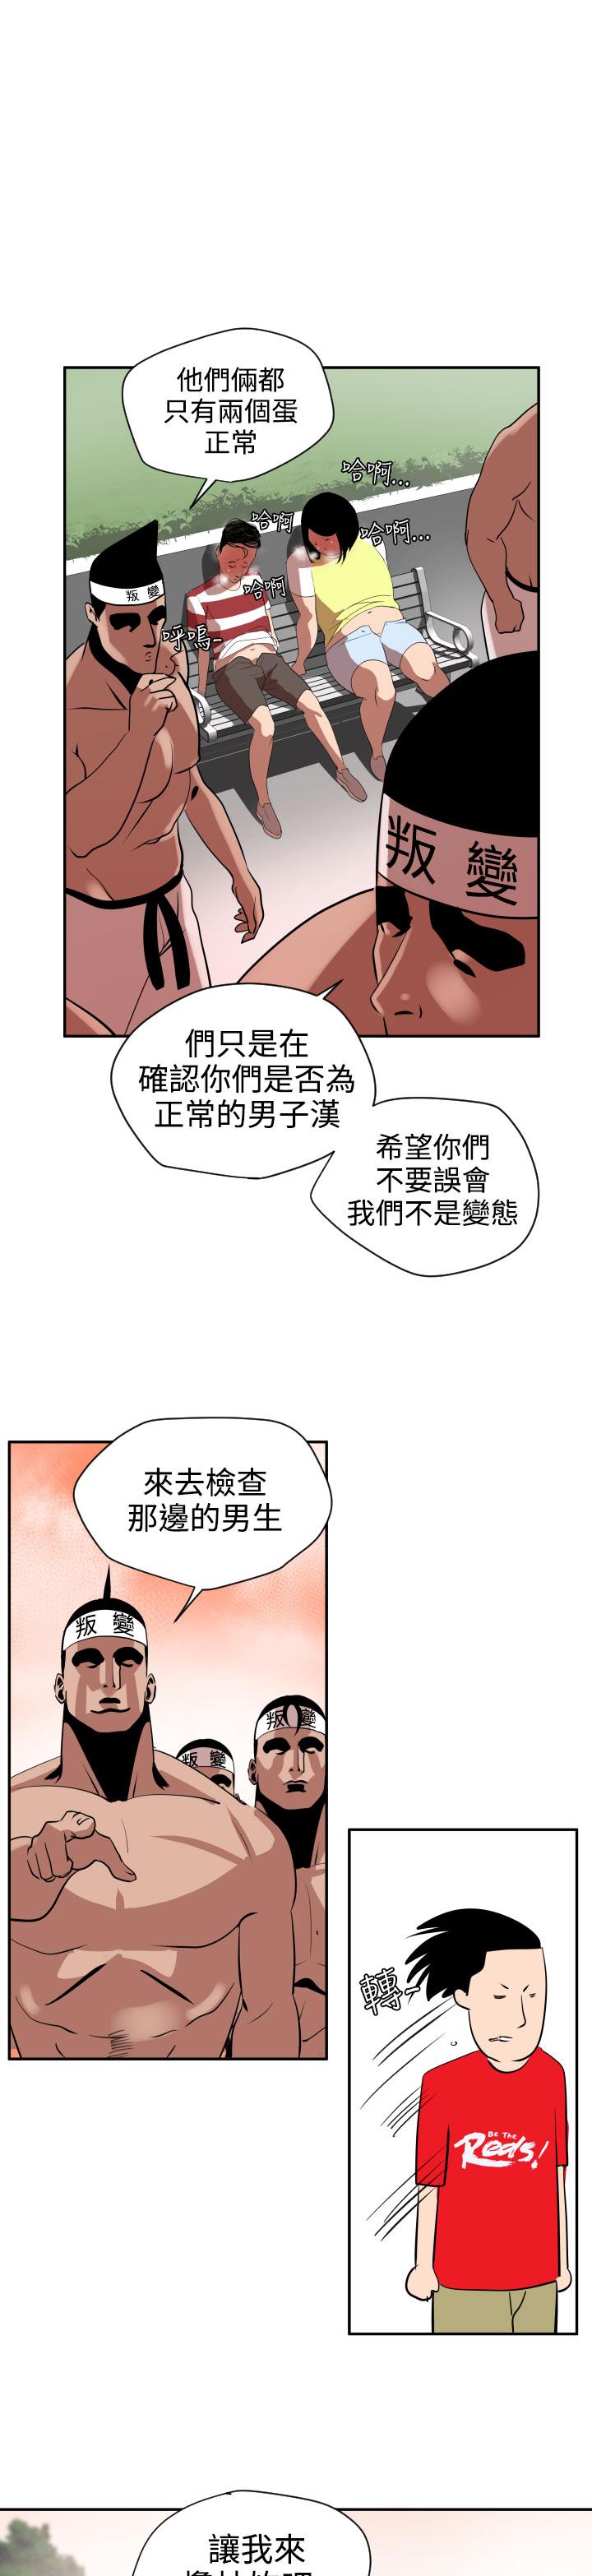 Desire King (慾求王) Ch.1-16 (chinese) 278